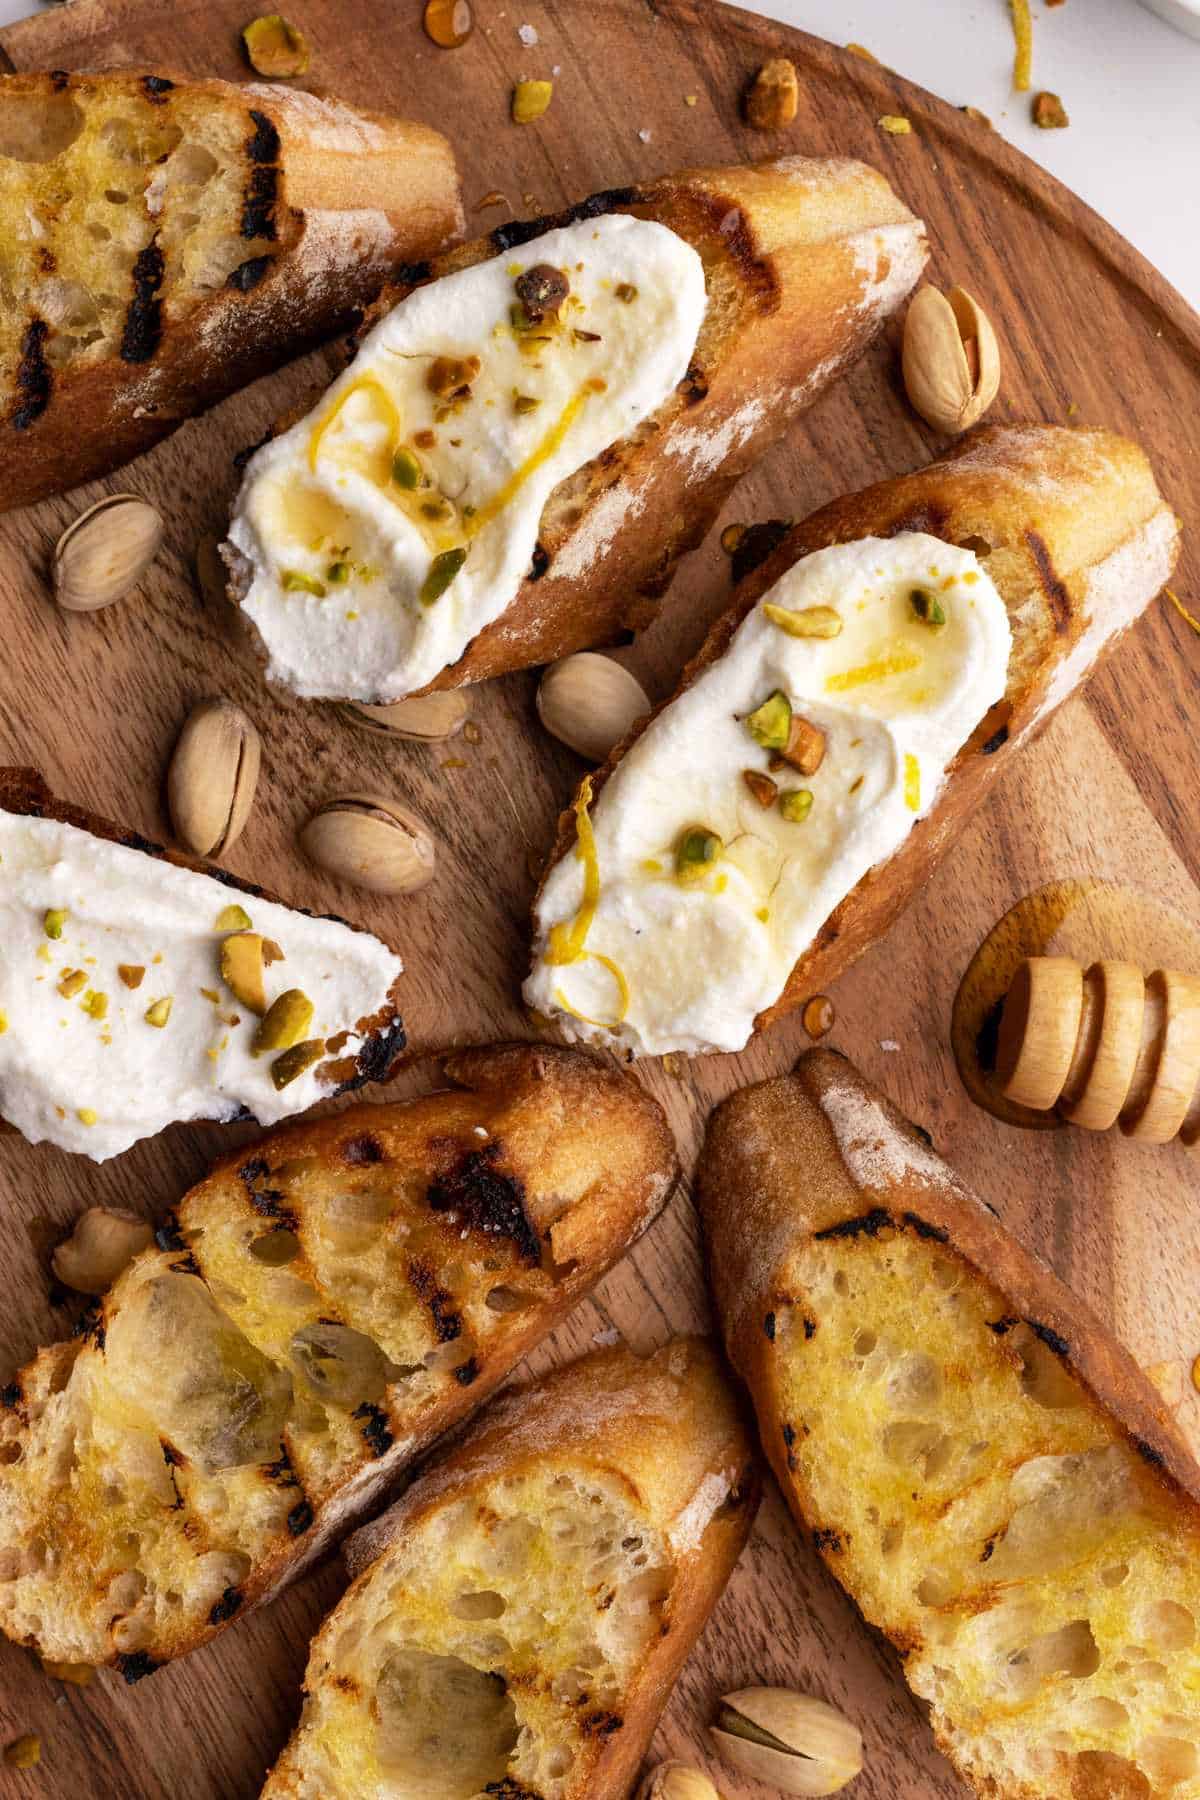 Honey ricotta toast with pistachios on wooden board.